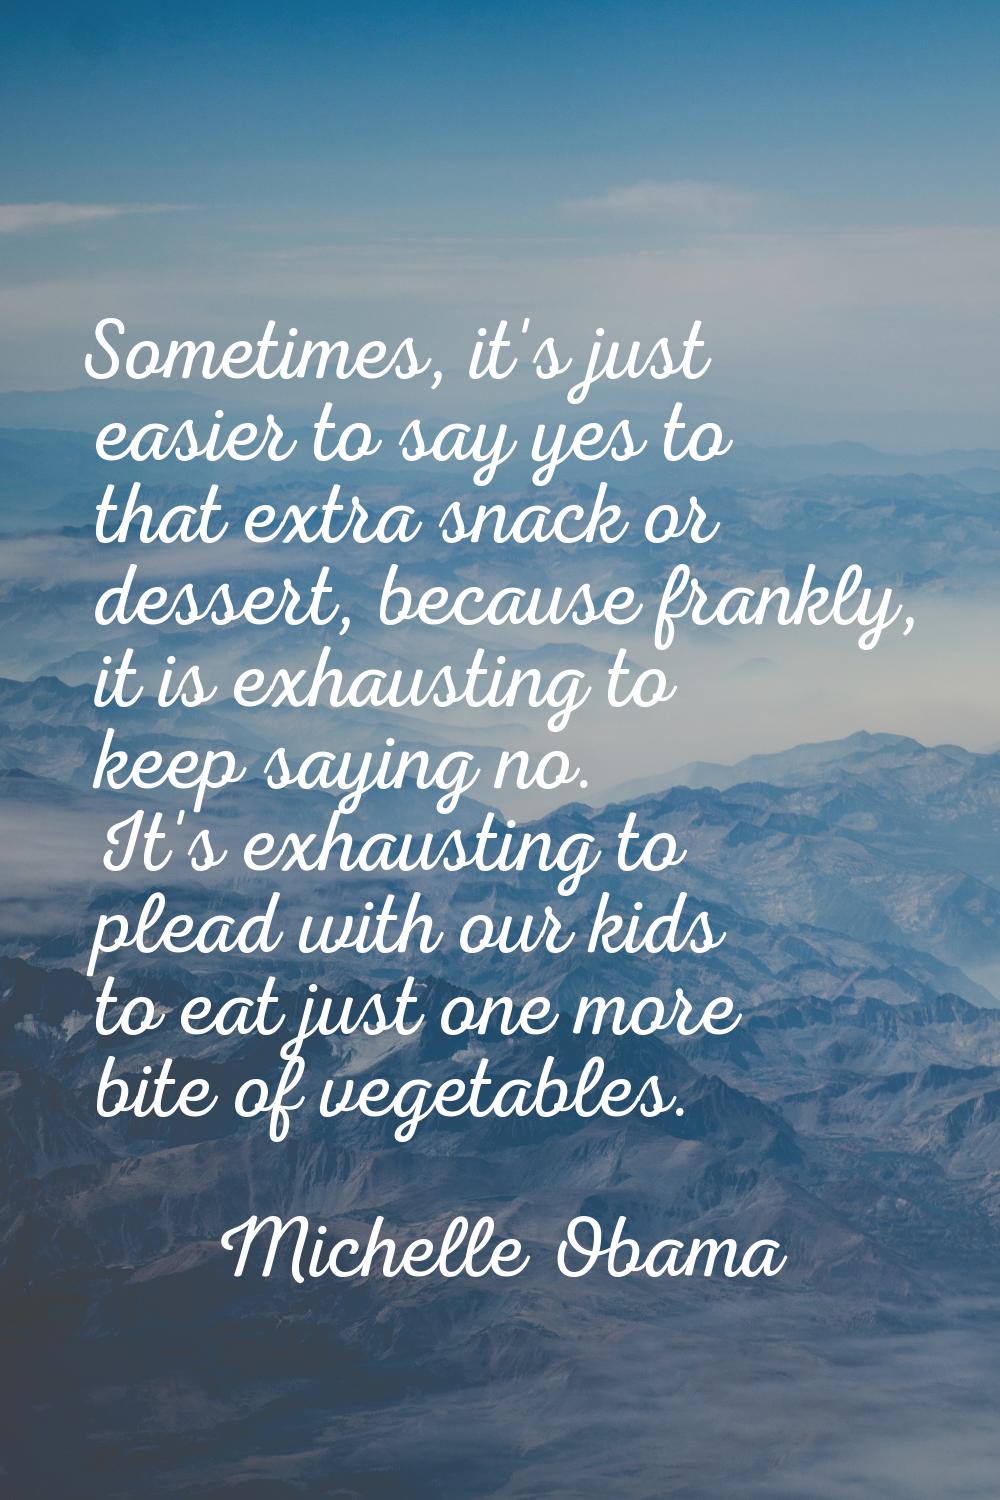 Sometimes, it's just easier to say yes to that extra snack or dessert, because frankly, it is exhau